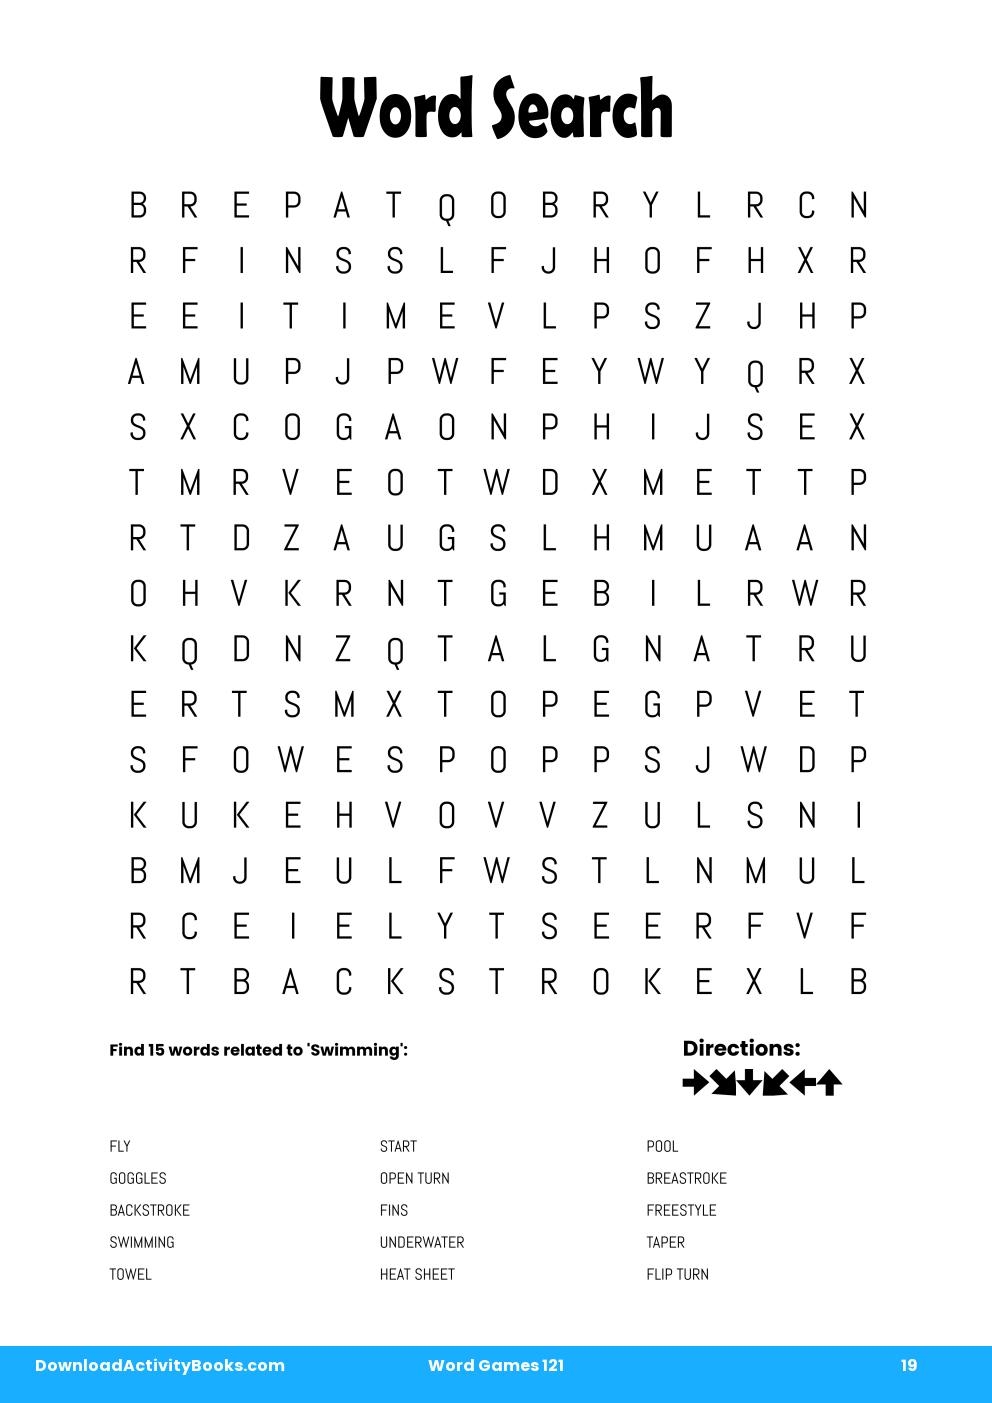 Word Search in Word Games 121